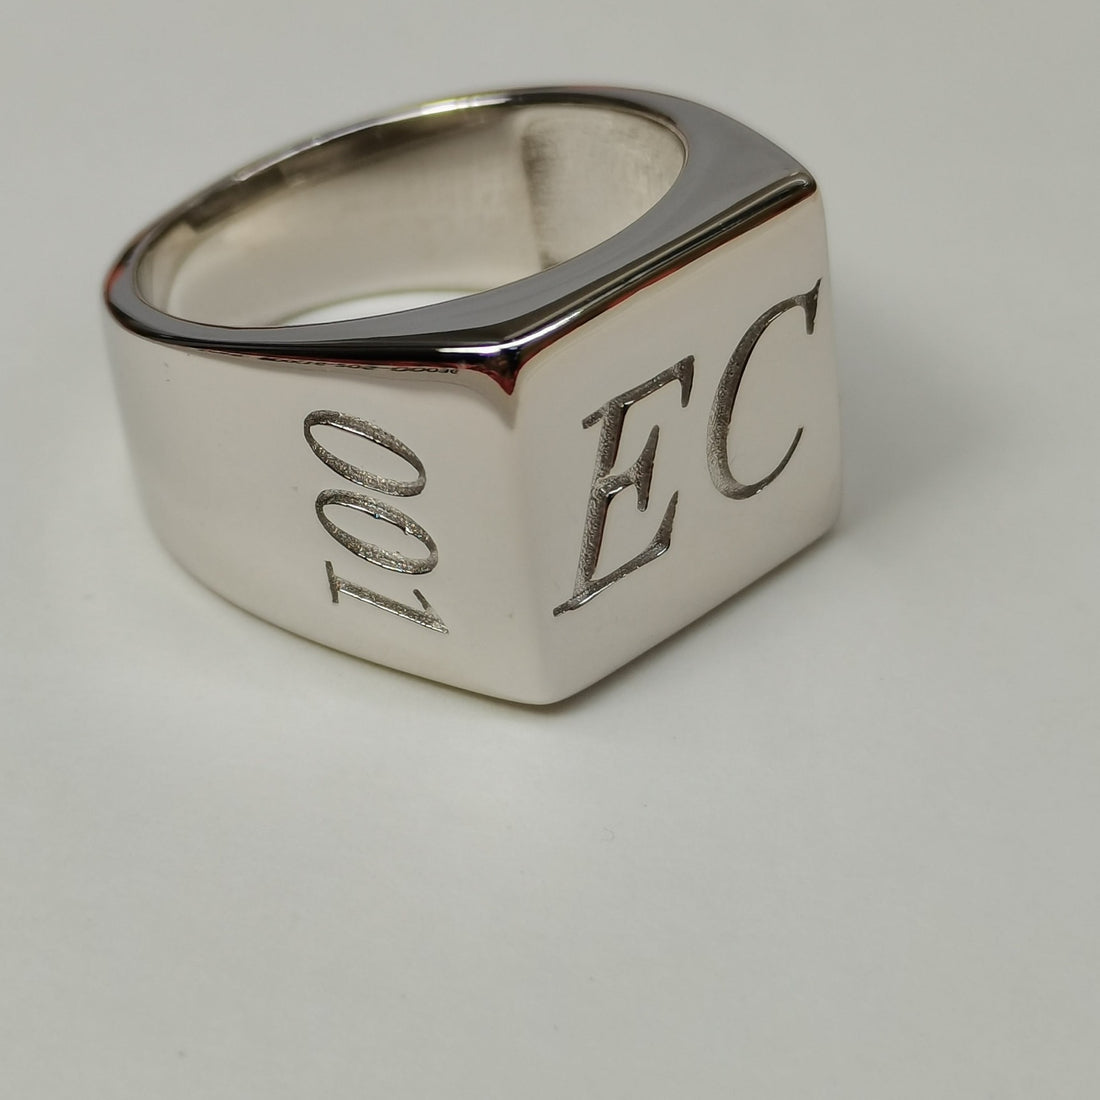 The '001' Ring